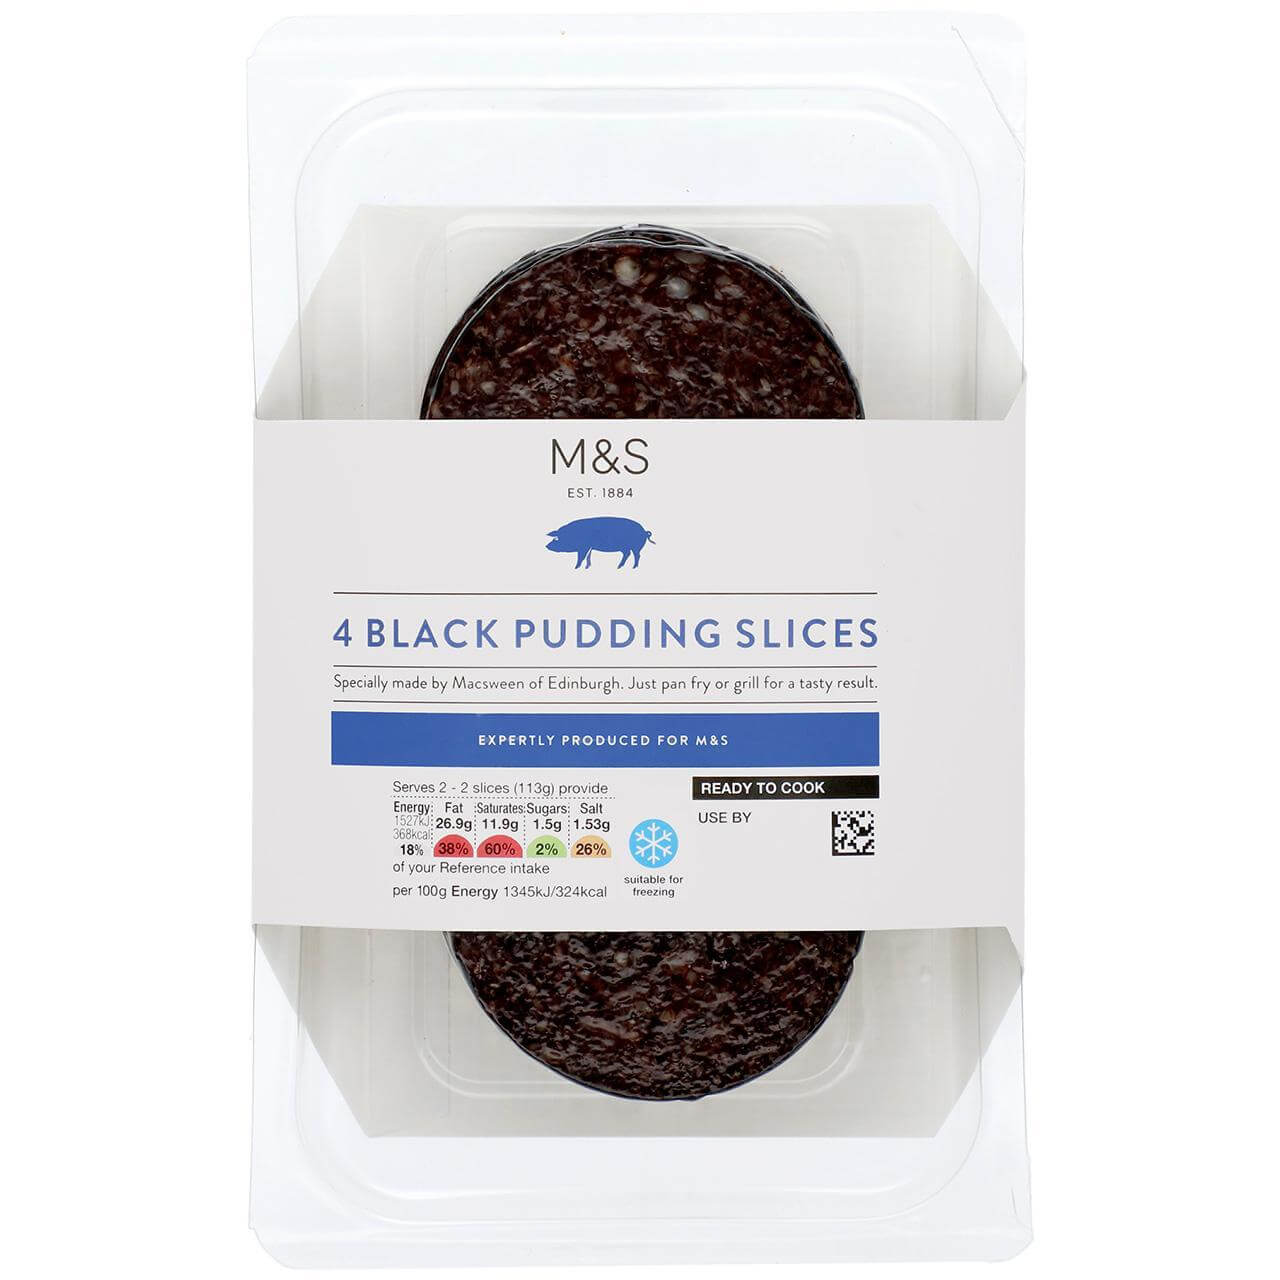 Image of M&S Black Pudding Slices made in the UK by Marks & Spencer Food. Buying this product supports a UK business, jobs and the local community